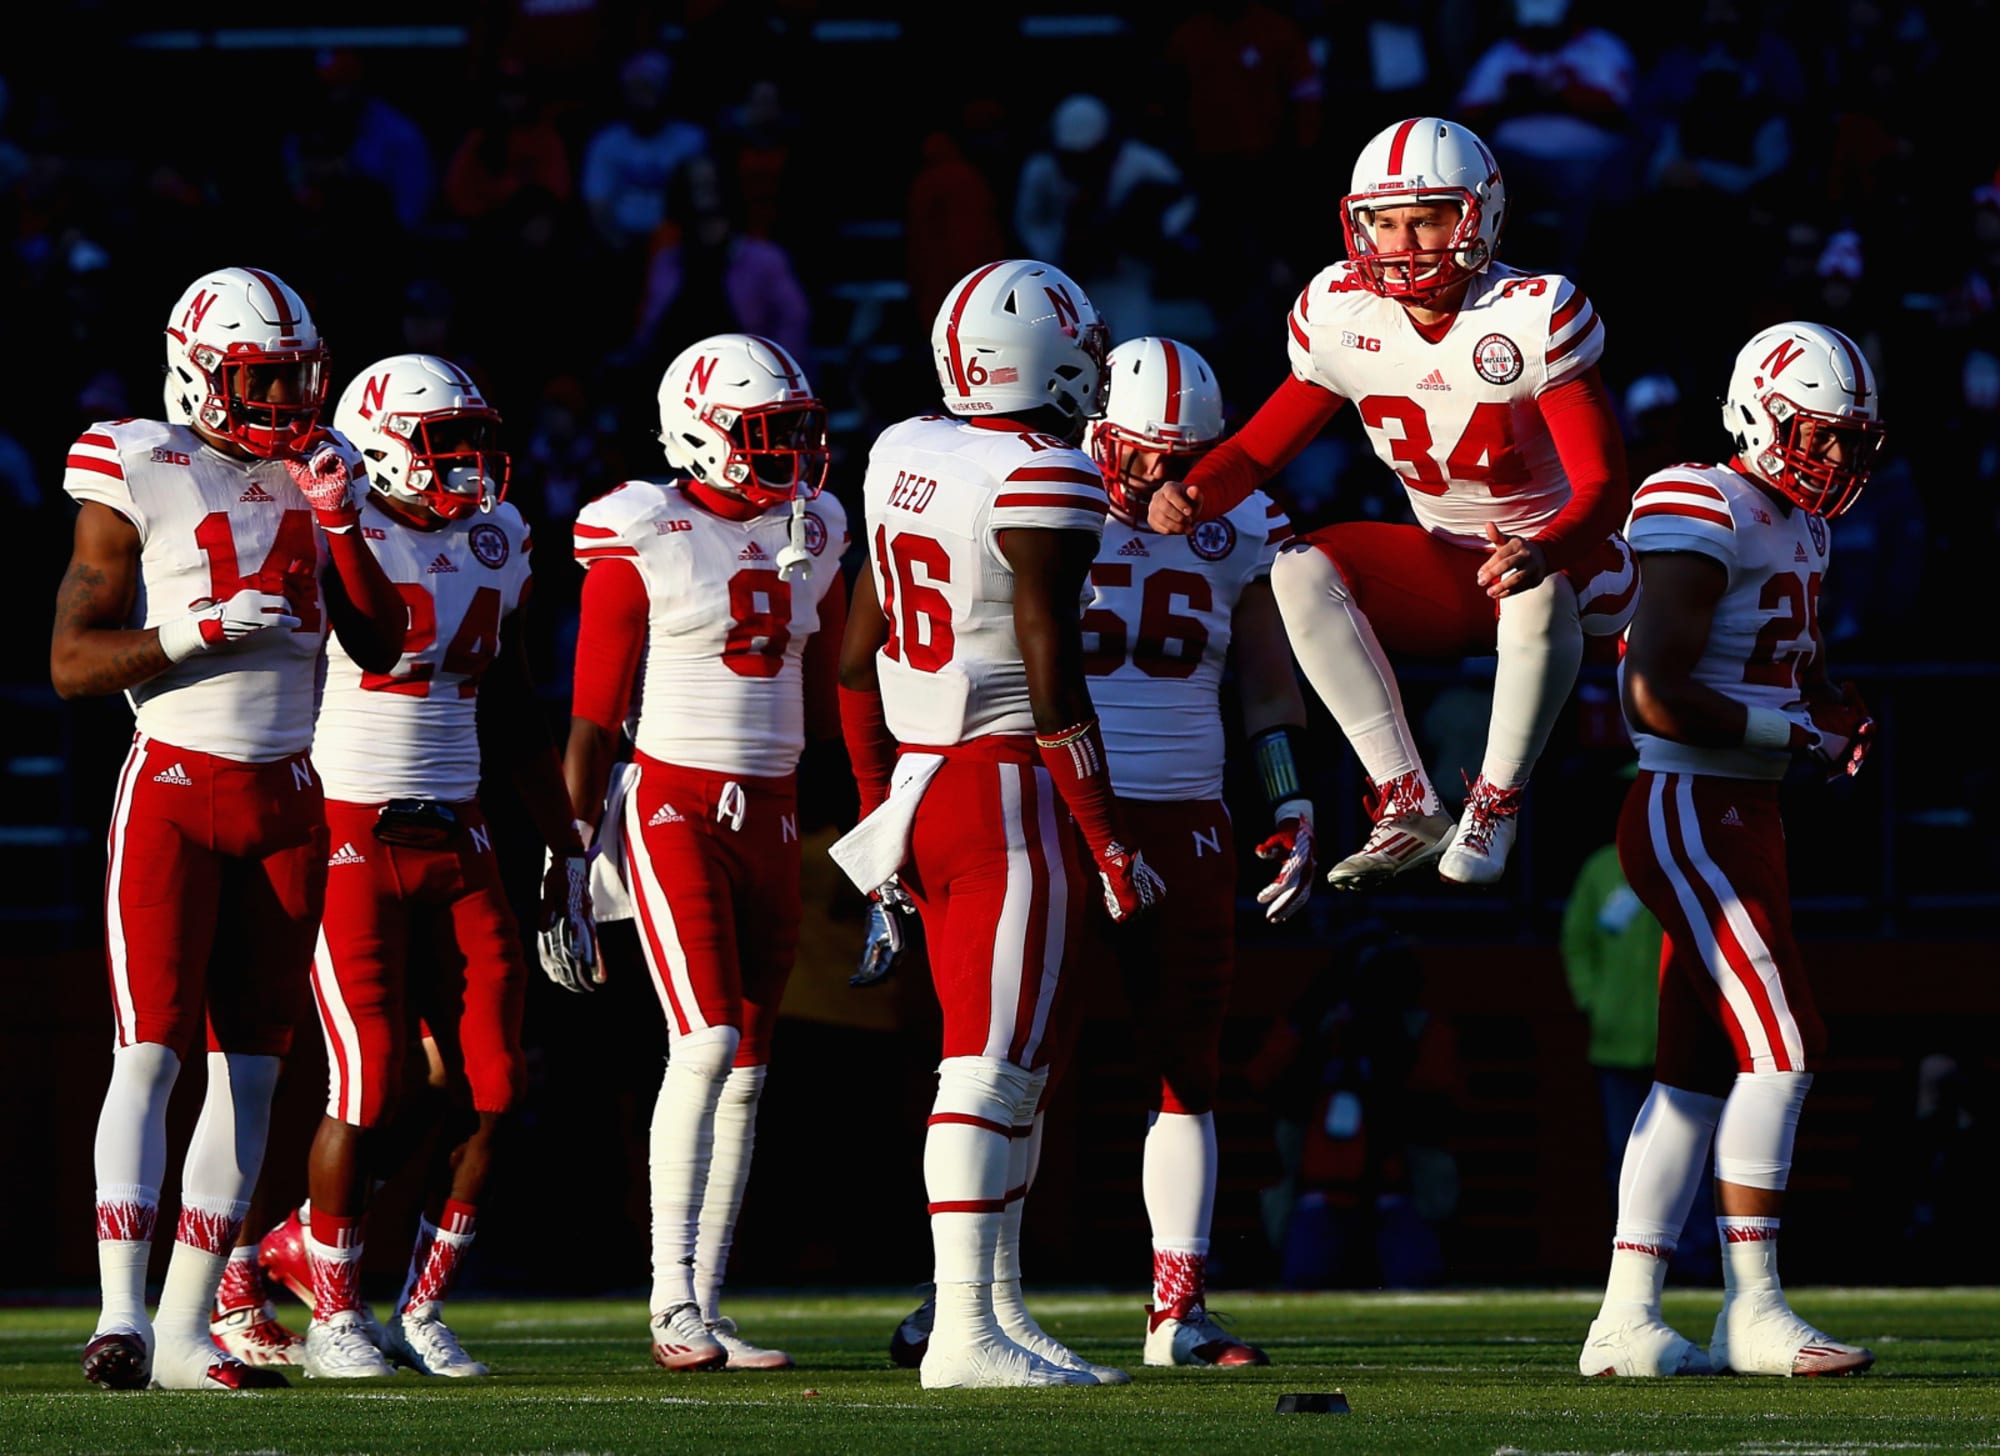 New Nebraska football players get their numbers assigned